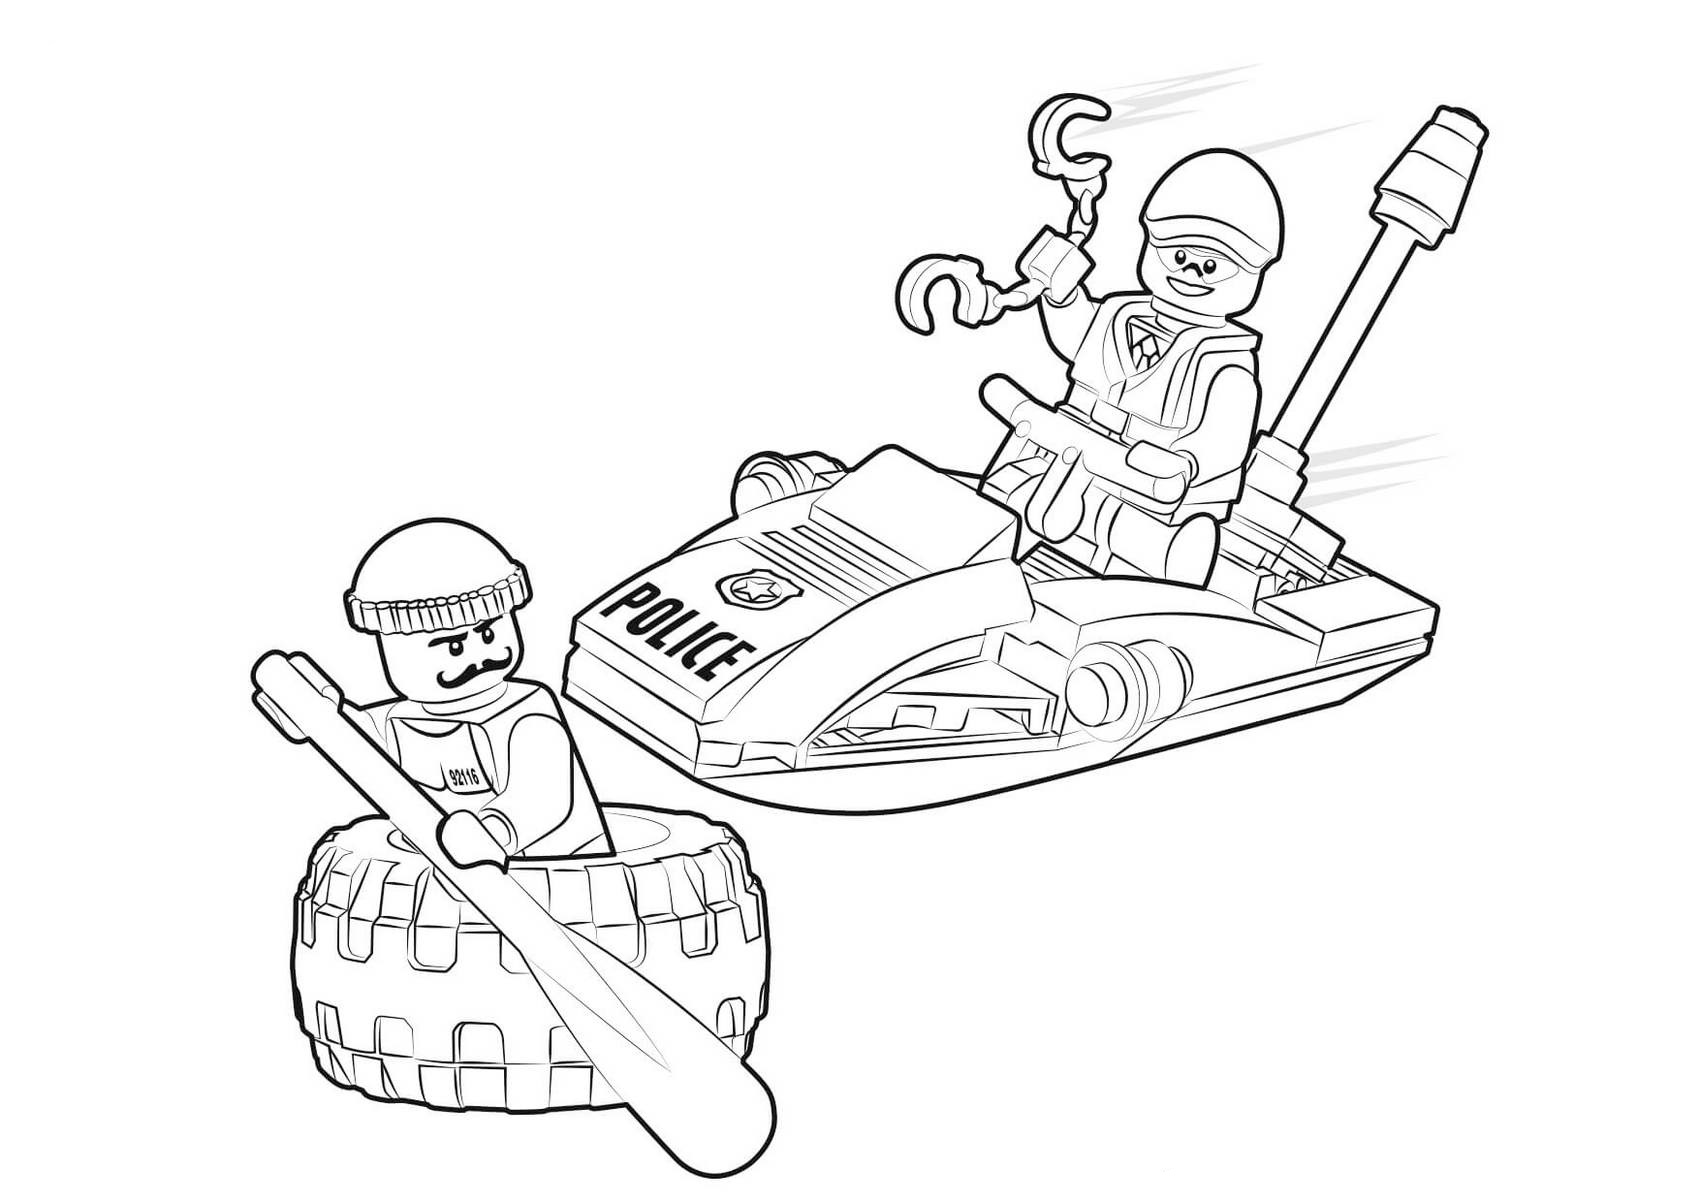 Lego Police Car Coloring Pages at GetDrawings | Free download